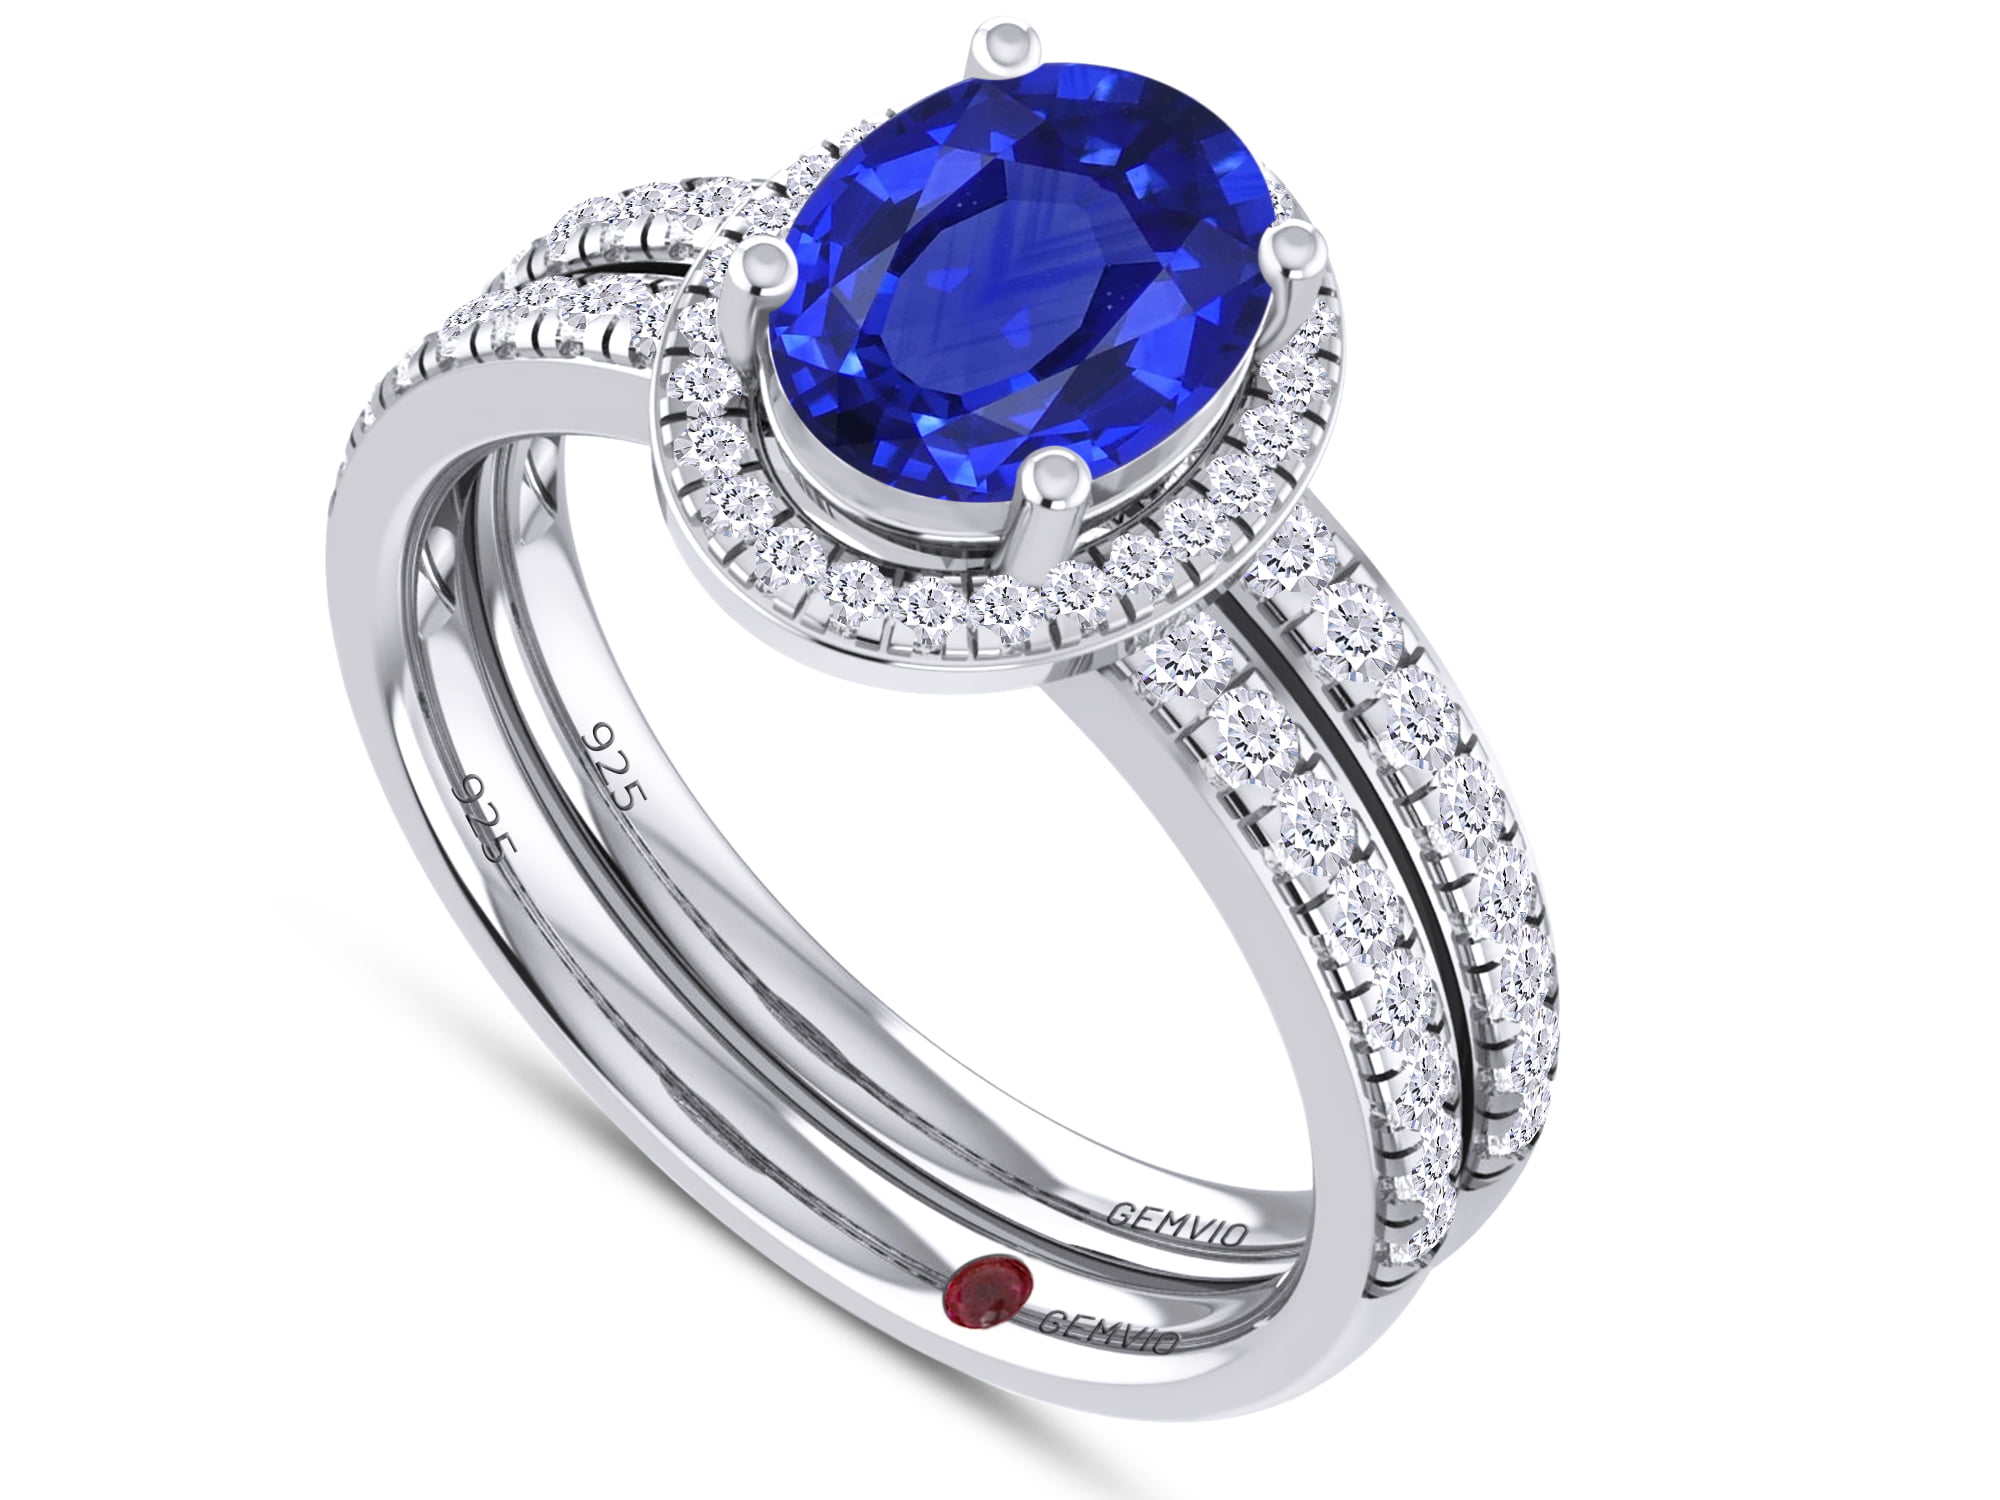 Wishrocks Simulated Birthstone with CZ Mens Wedding Band Ring in 14K White Gold Over Sterling Silver 